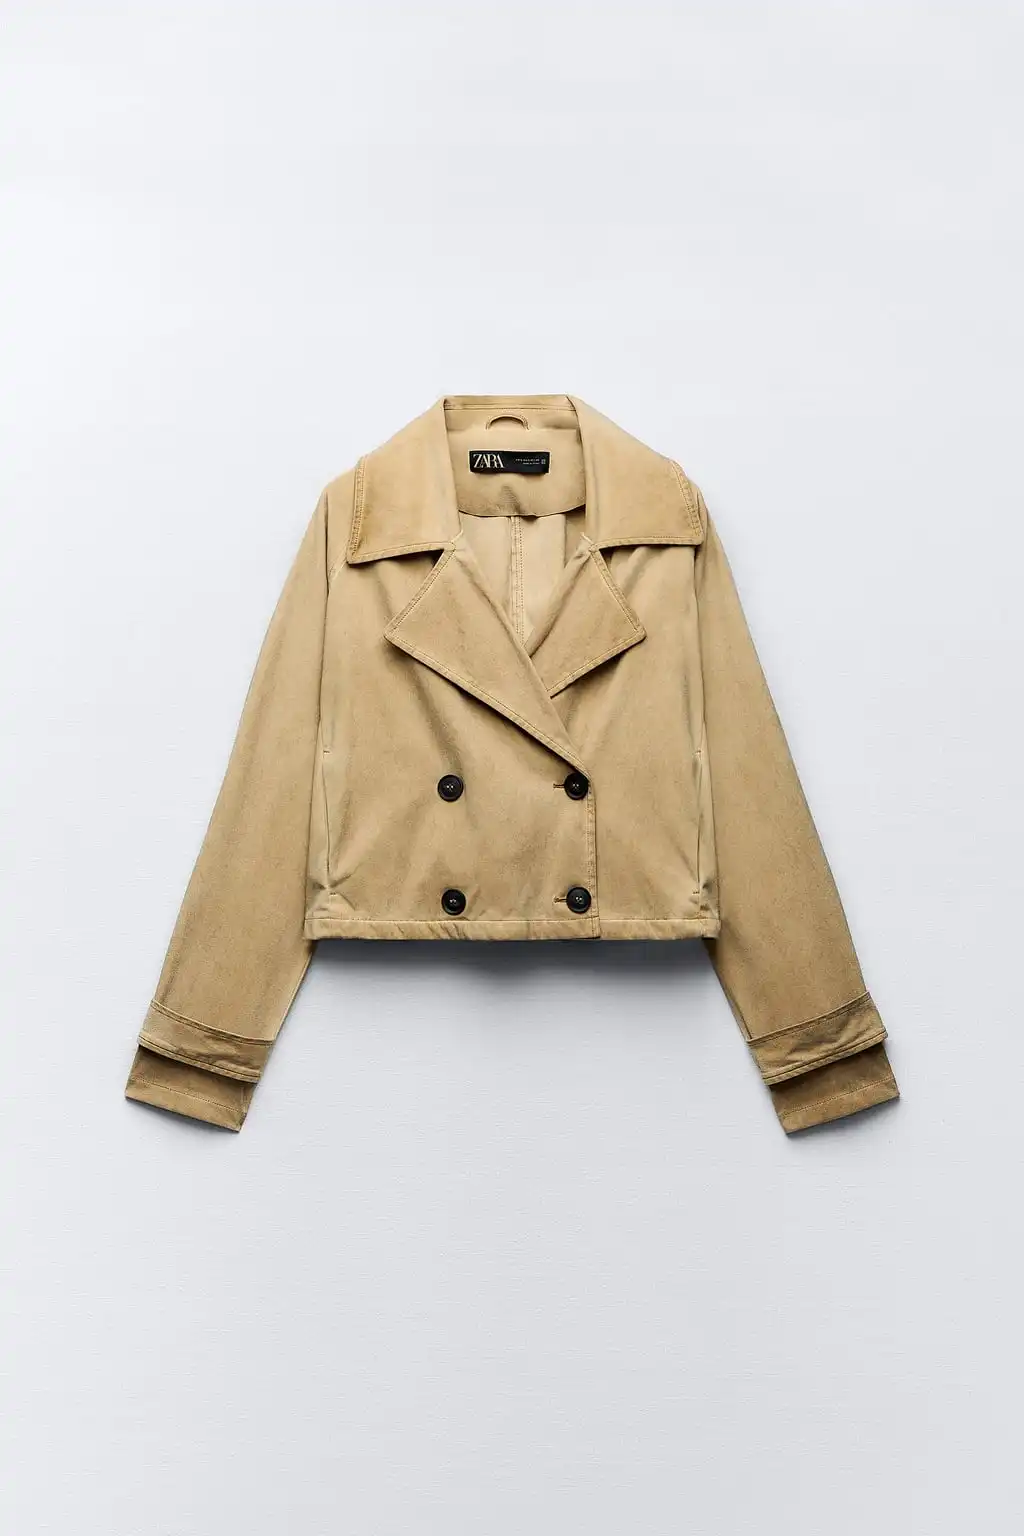 Zara Faux Suede Cropped Trench